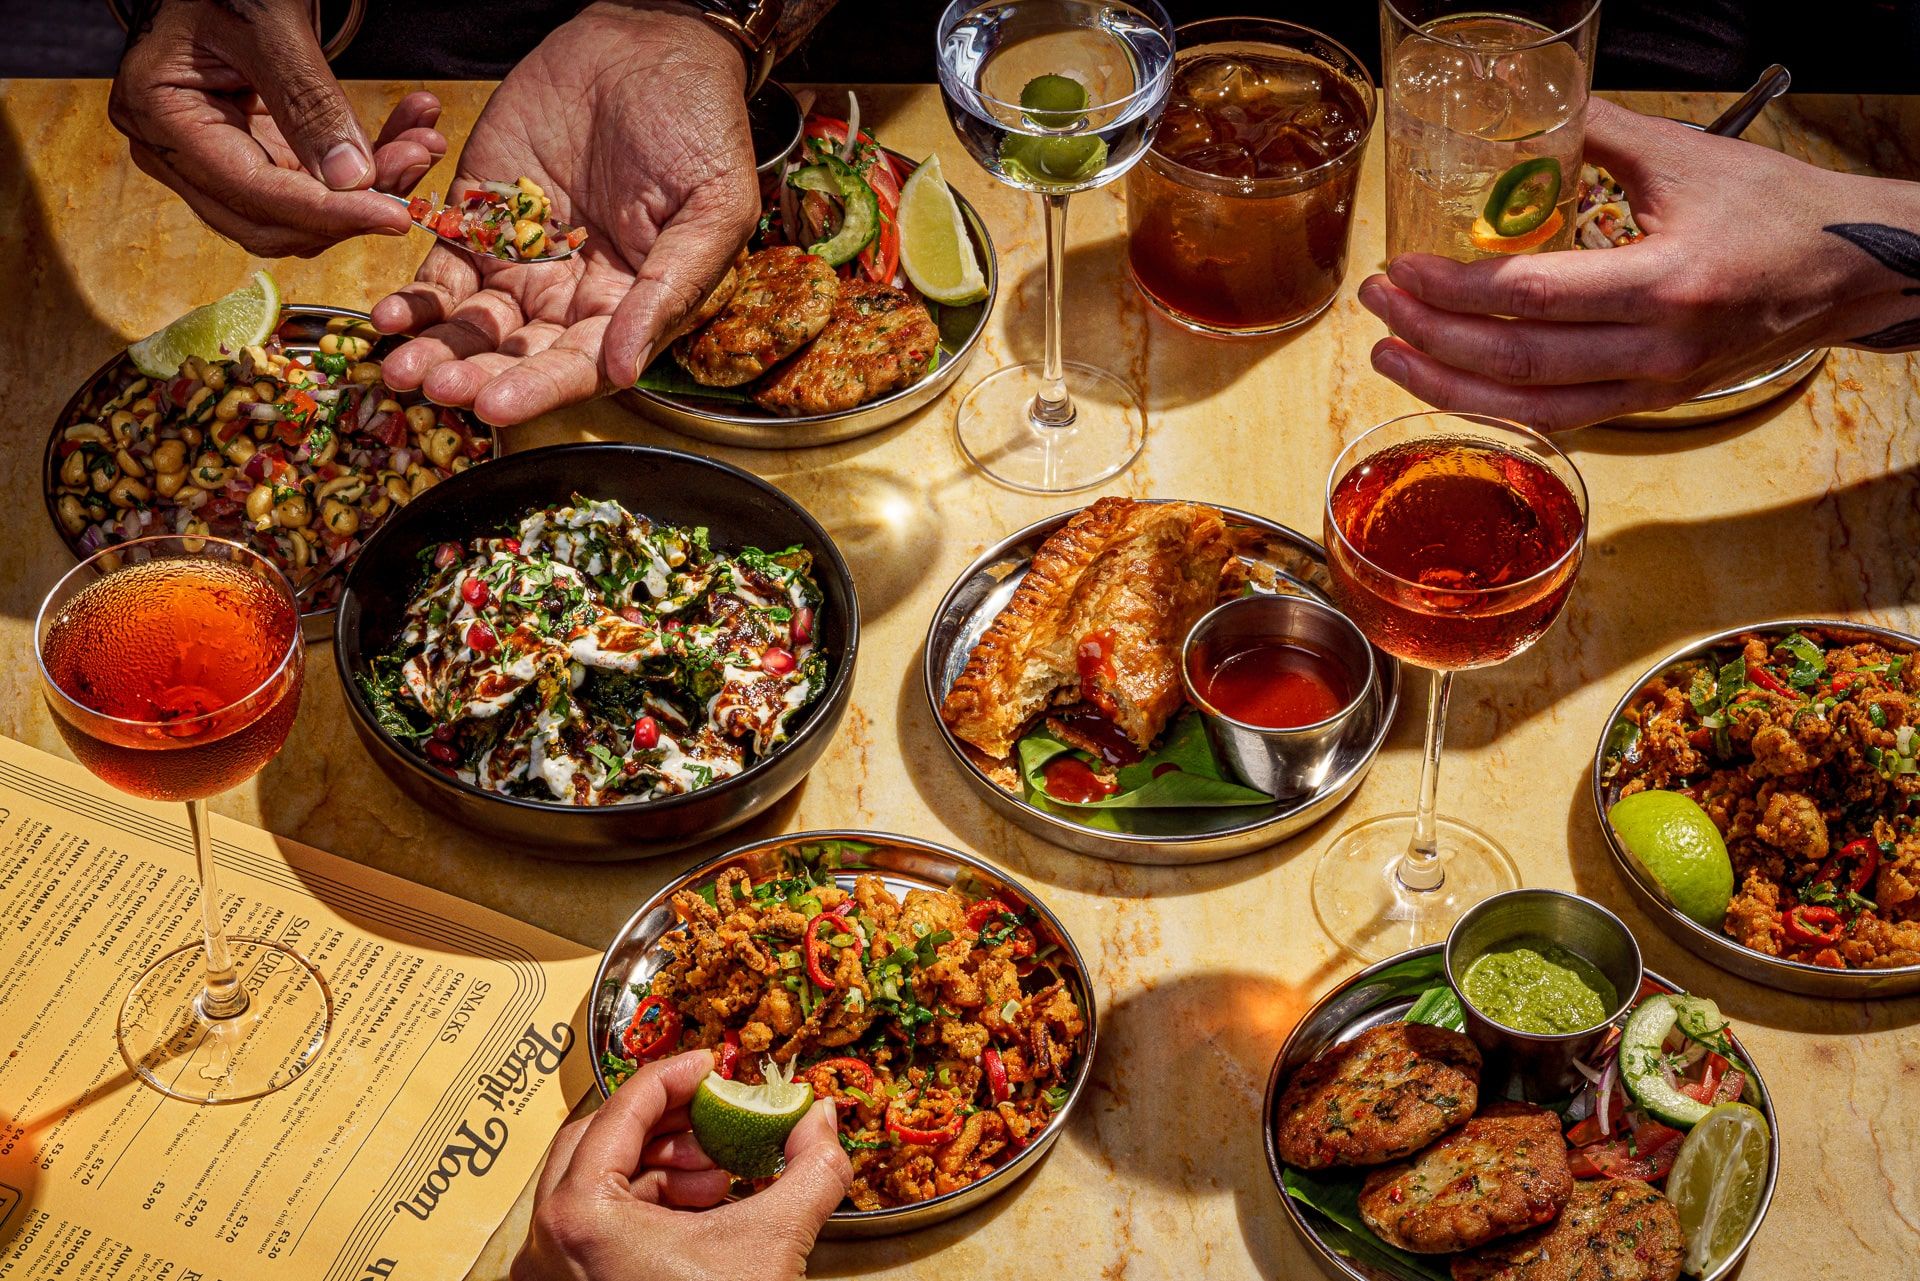 Lots of plates of food with people's hands in the shot eating the food. With drinks on the table to accompany the small plates of food. Photo Credit: Permit Room